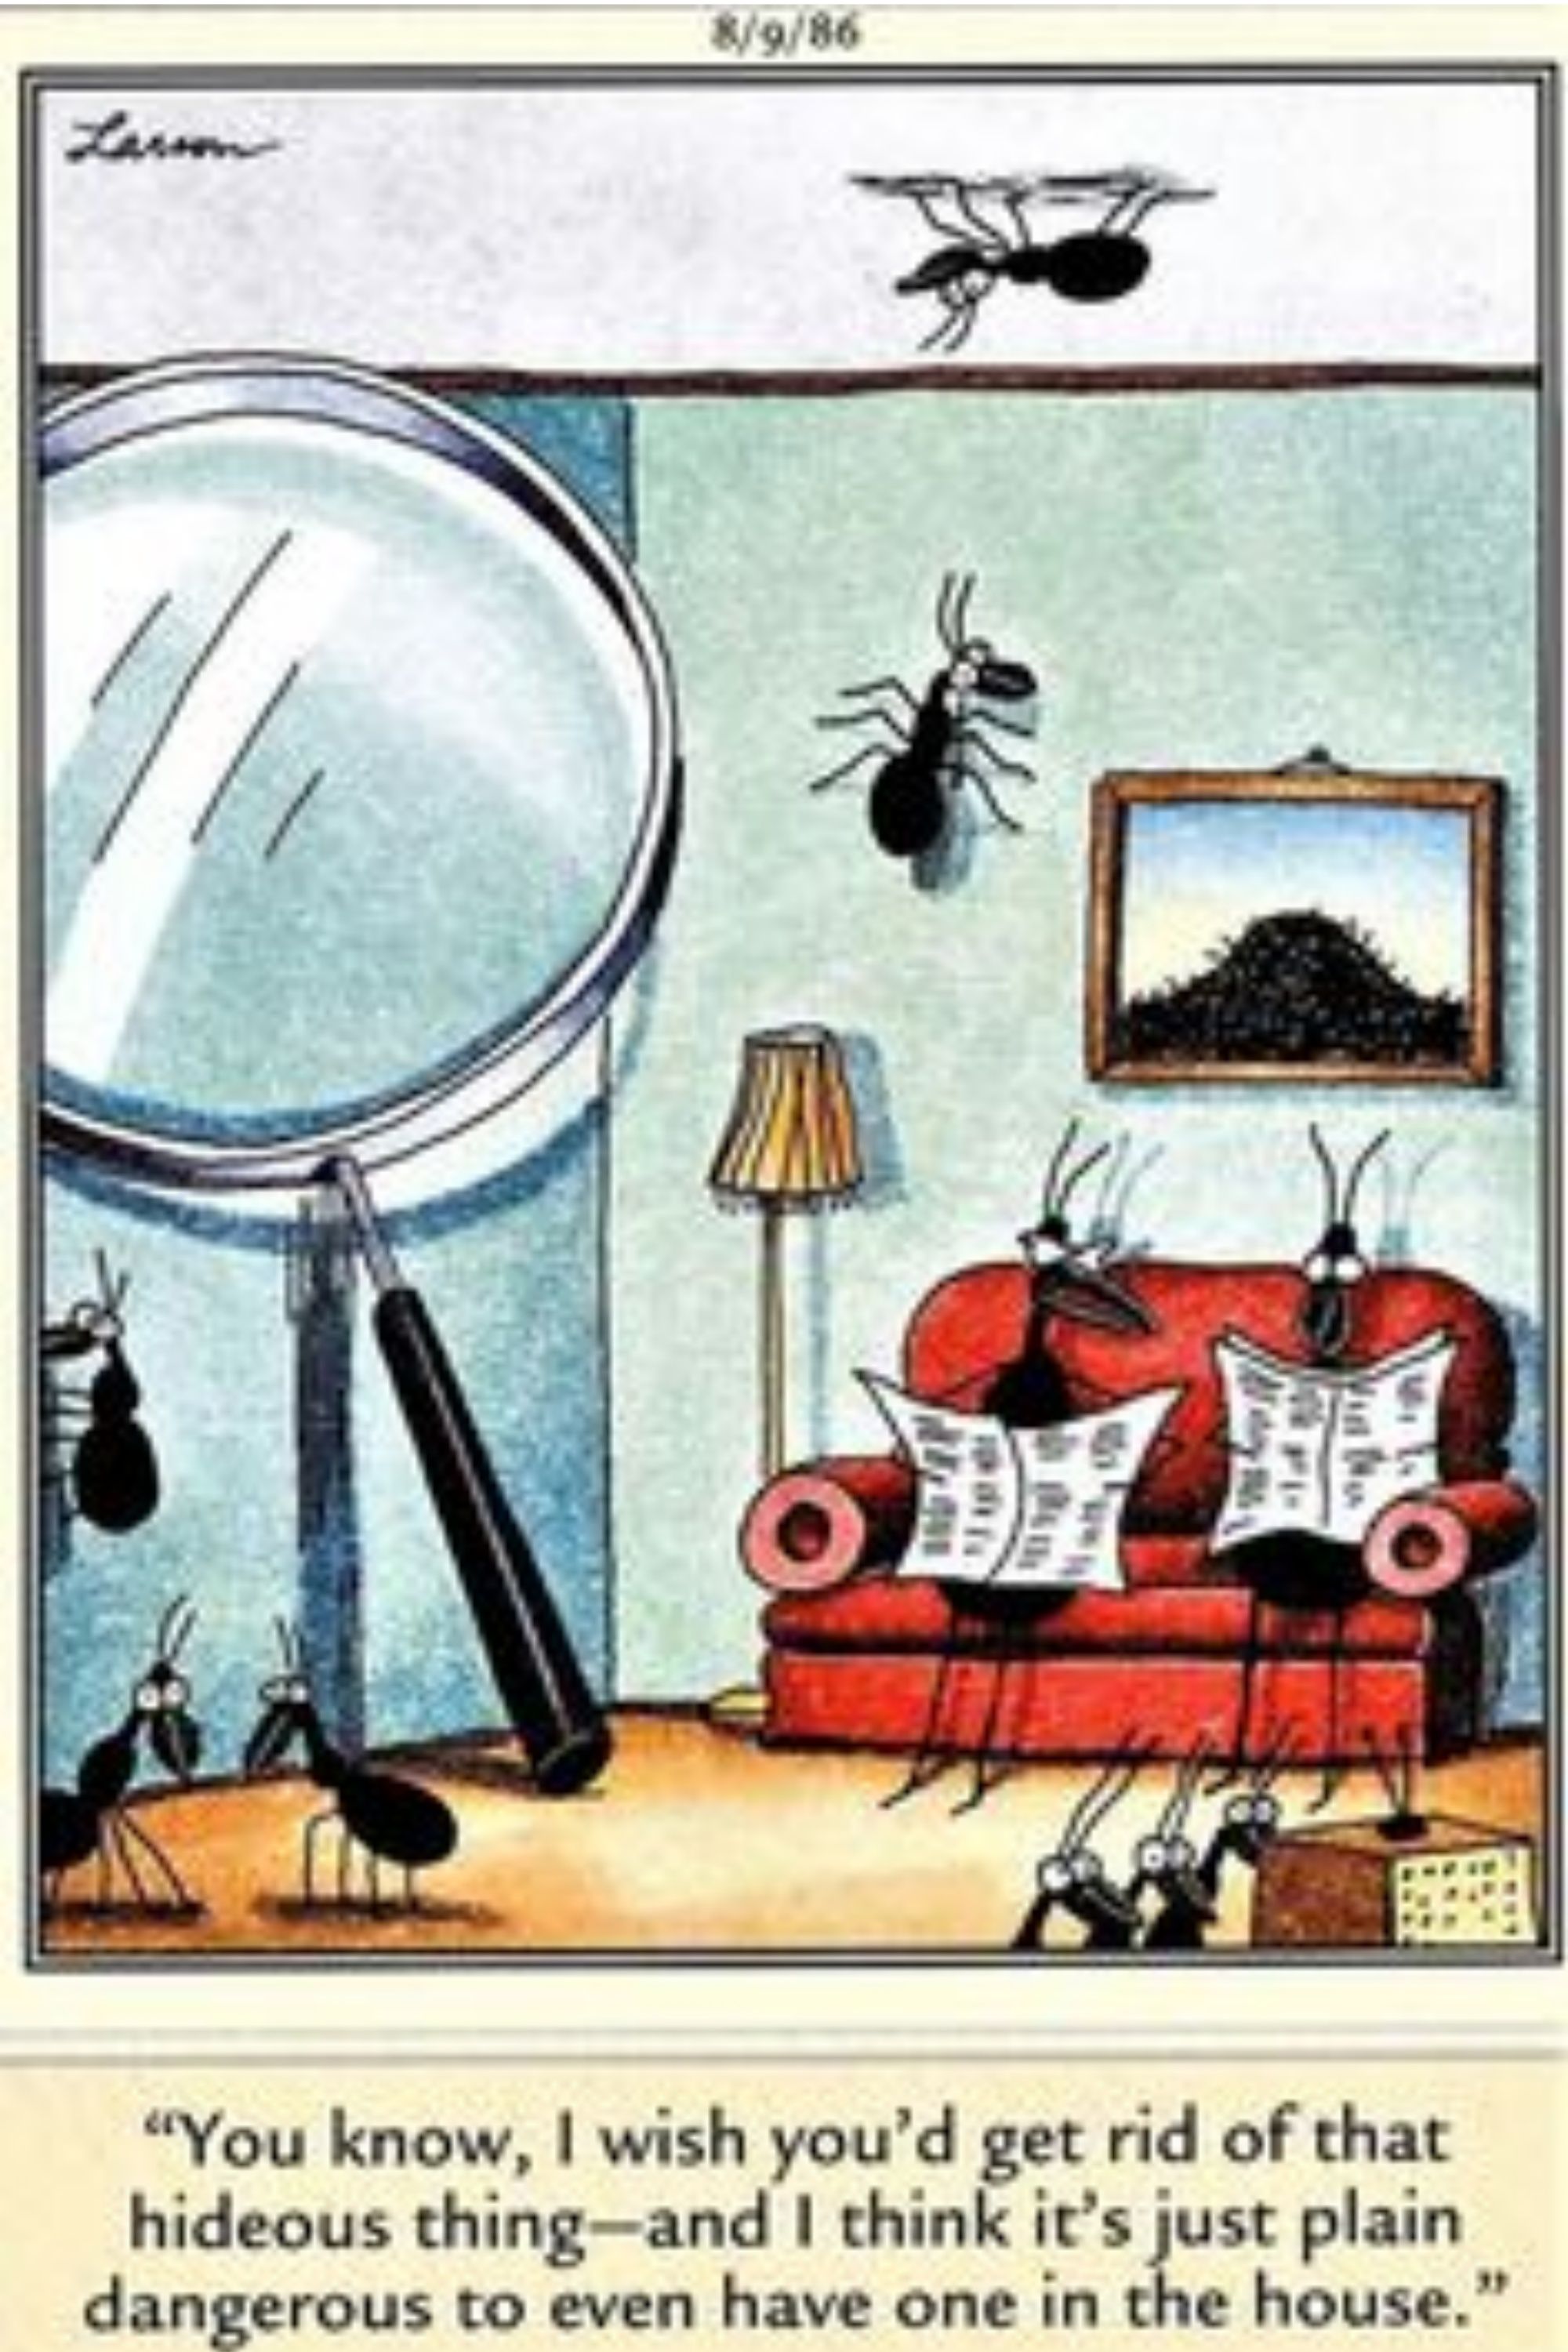 Ants and a magnifying glass in Far Side.